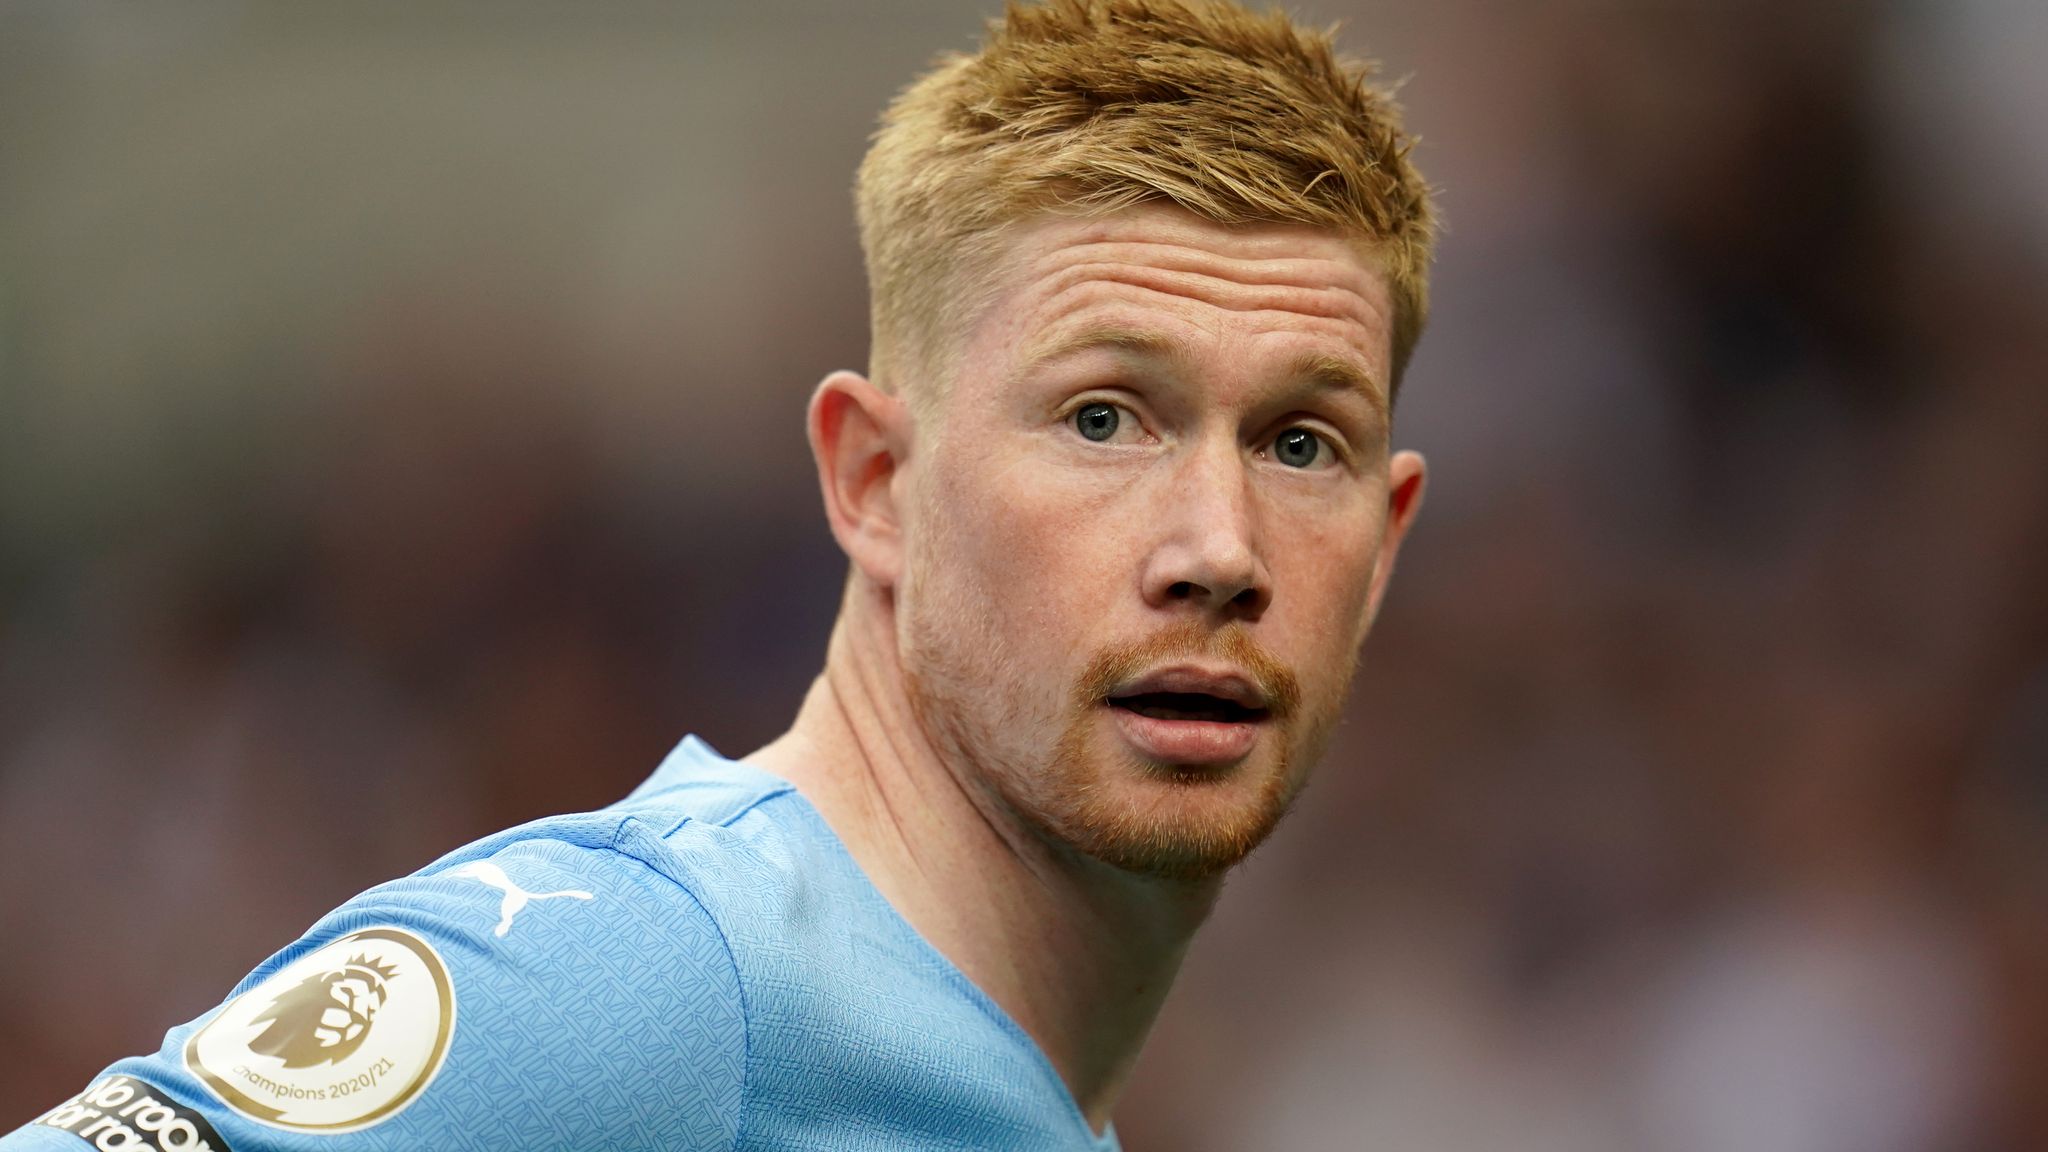 Kevin De Bruyne: Pep Guardiola says Man City midfielder will start against RB Leipzig in Champions League | Football News | Sky Sports